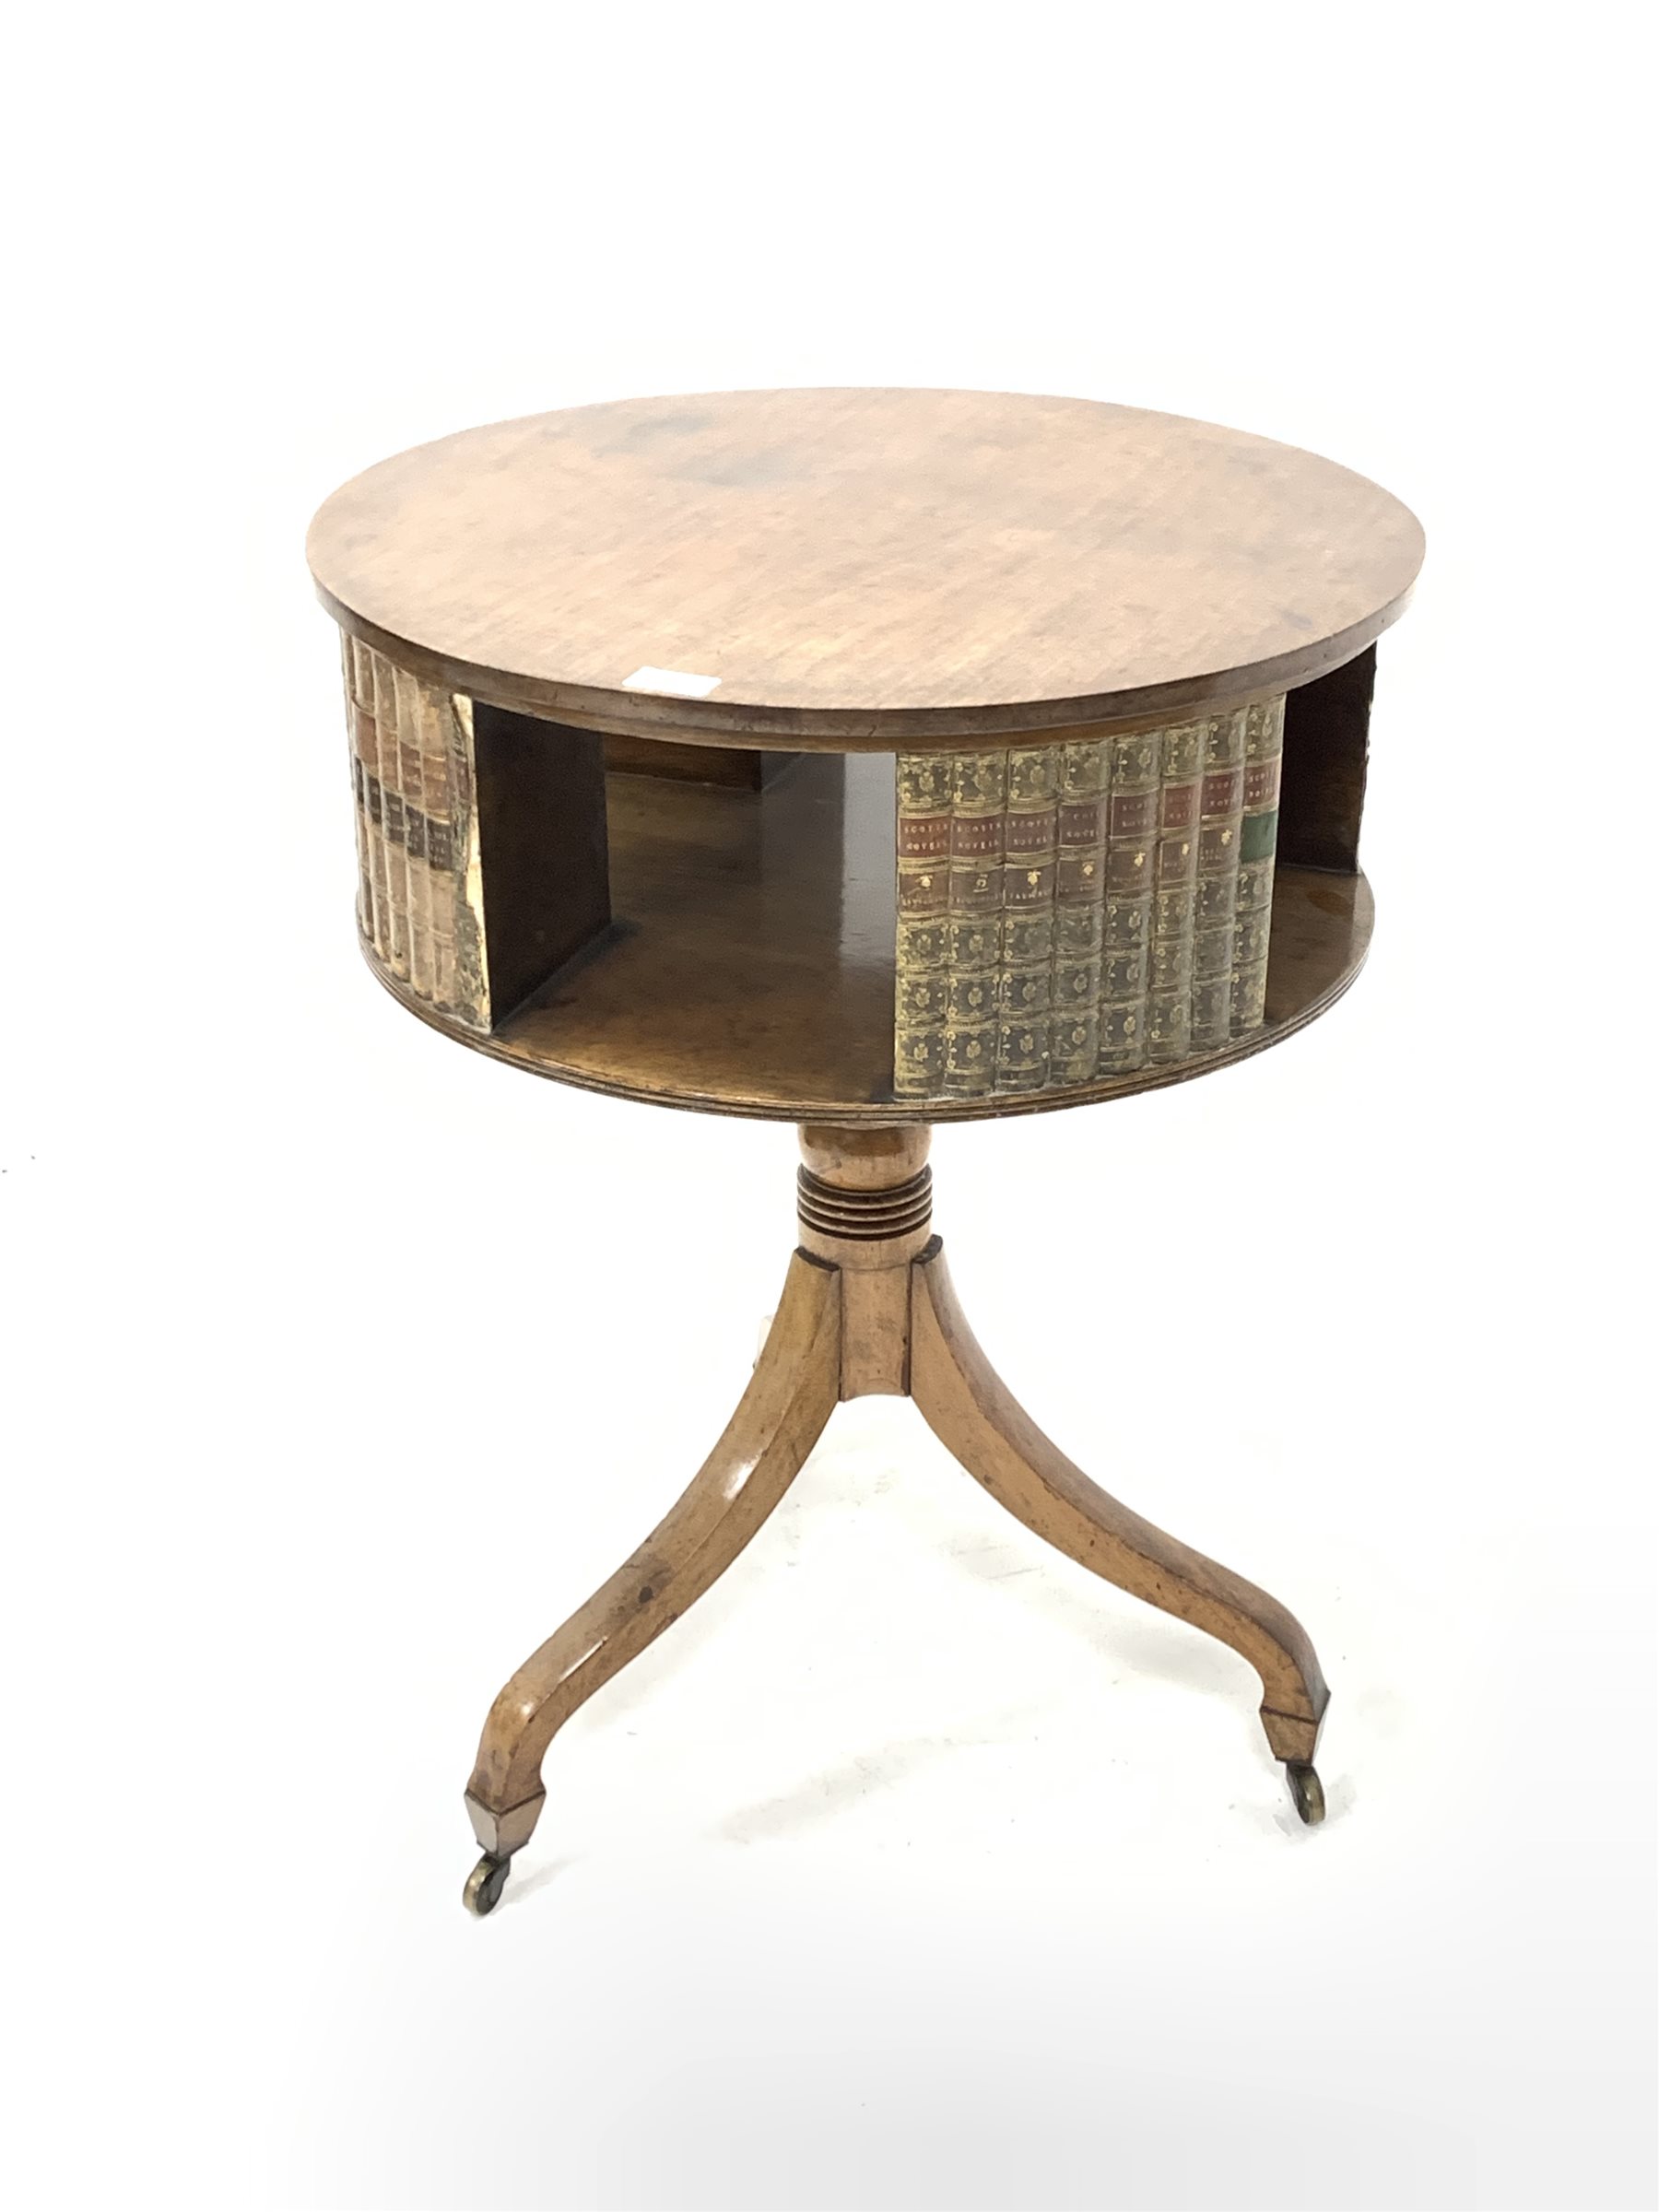 20th century Regency design mahogany drum table, the circular revolving top having faux books and re